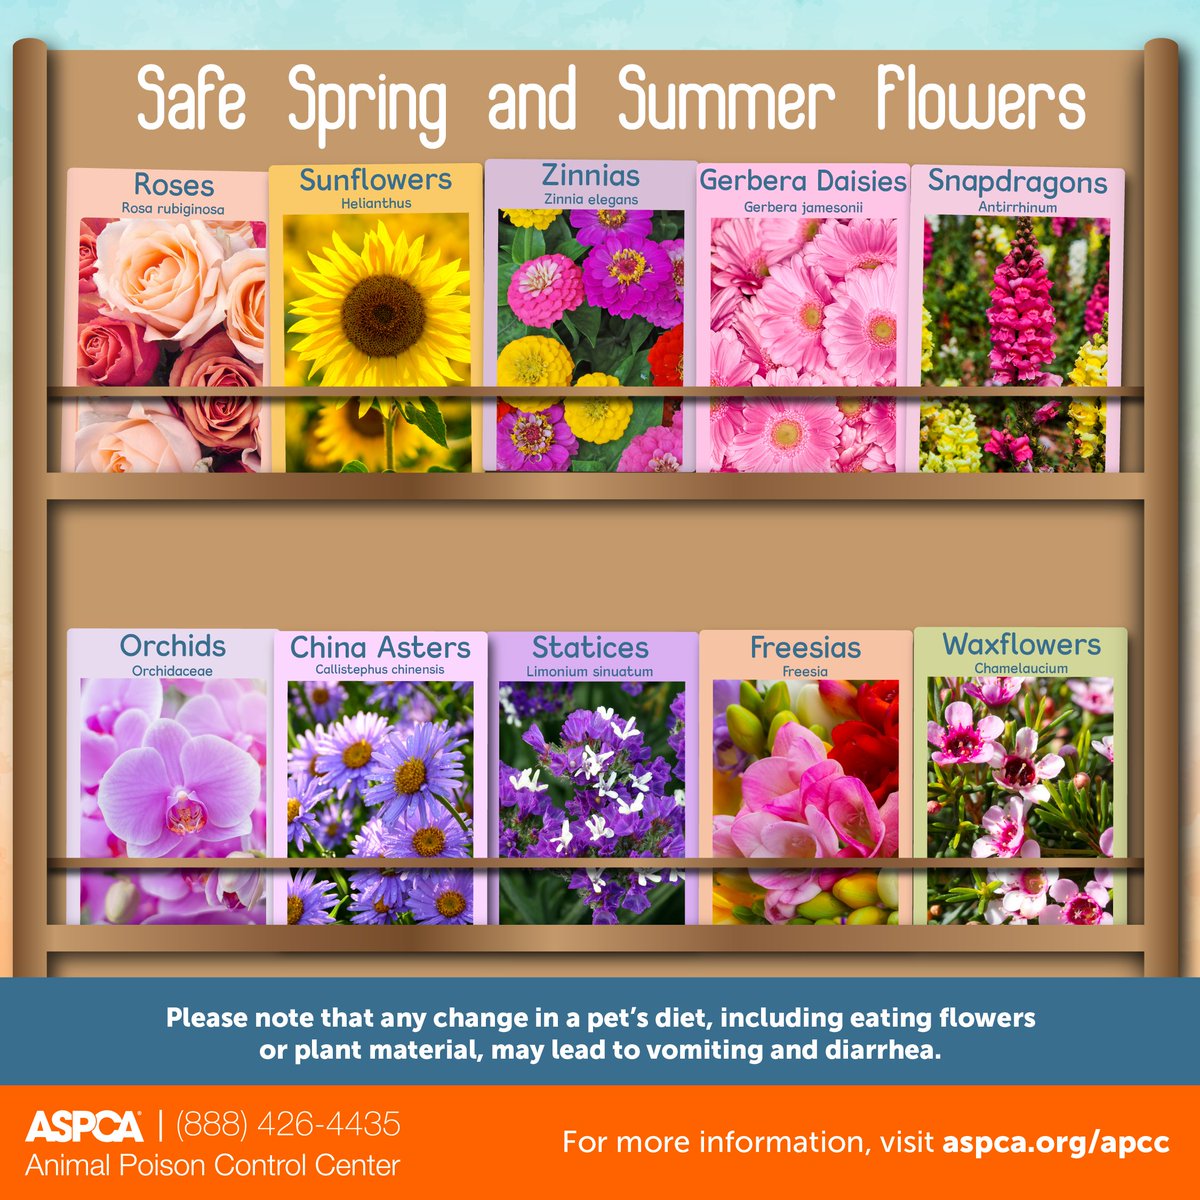 Spring is in full bloom. 🌻🌸 We know that flowers make perfect gifts. In preparation, check out this list of safe flowers from the @ASPCA Animal Poison Control Center. Share this with your community and help keep pets safe. #MothersDay #AnimalWelfare #PetSafety #ShareThis